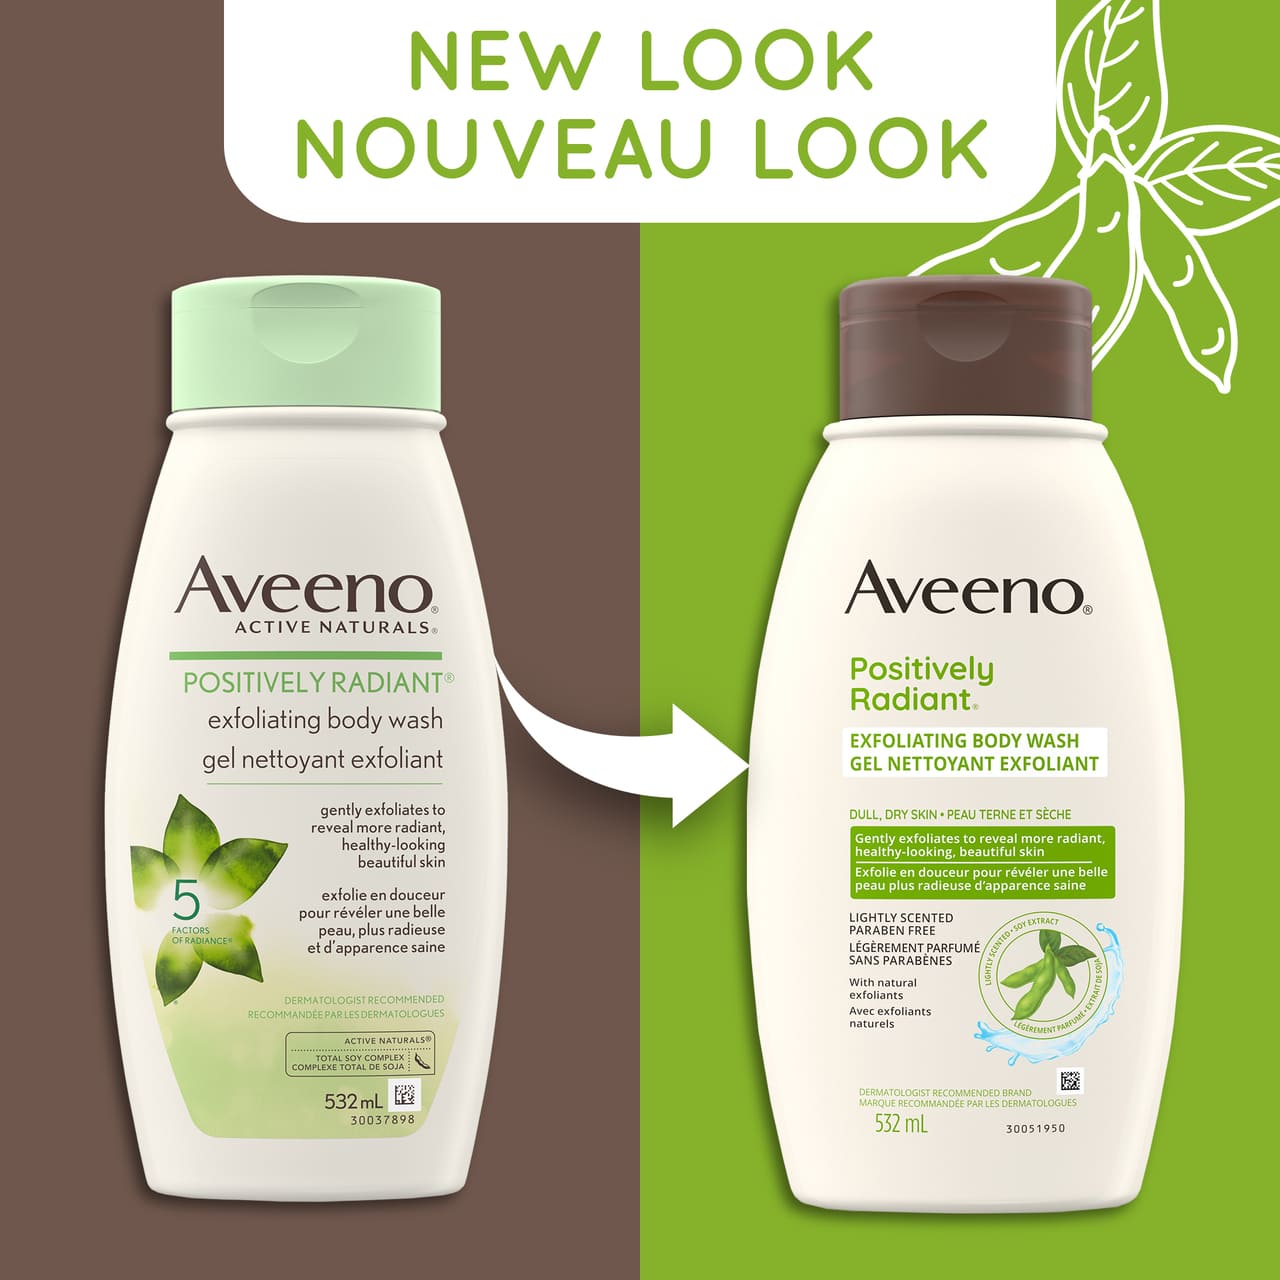 Old and new packaging of AVEENO® Postively Radiant Exfloliating Body Wash, 532mL bottles, with text 'new look'